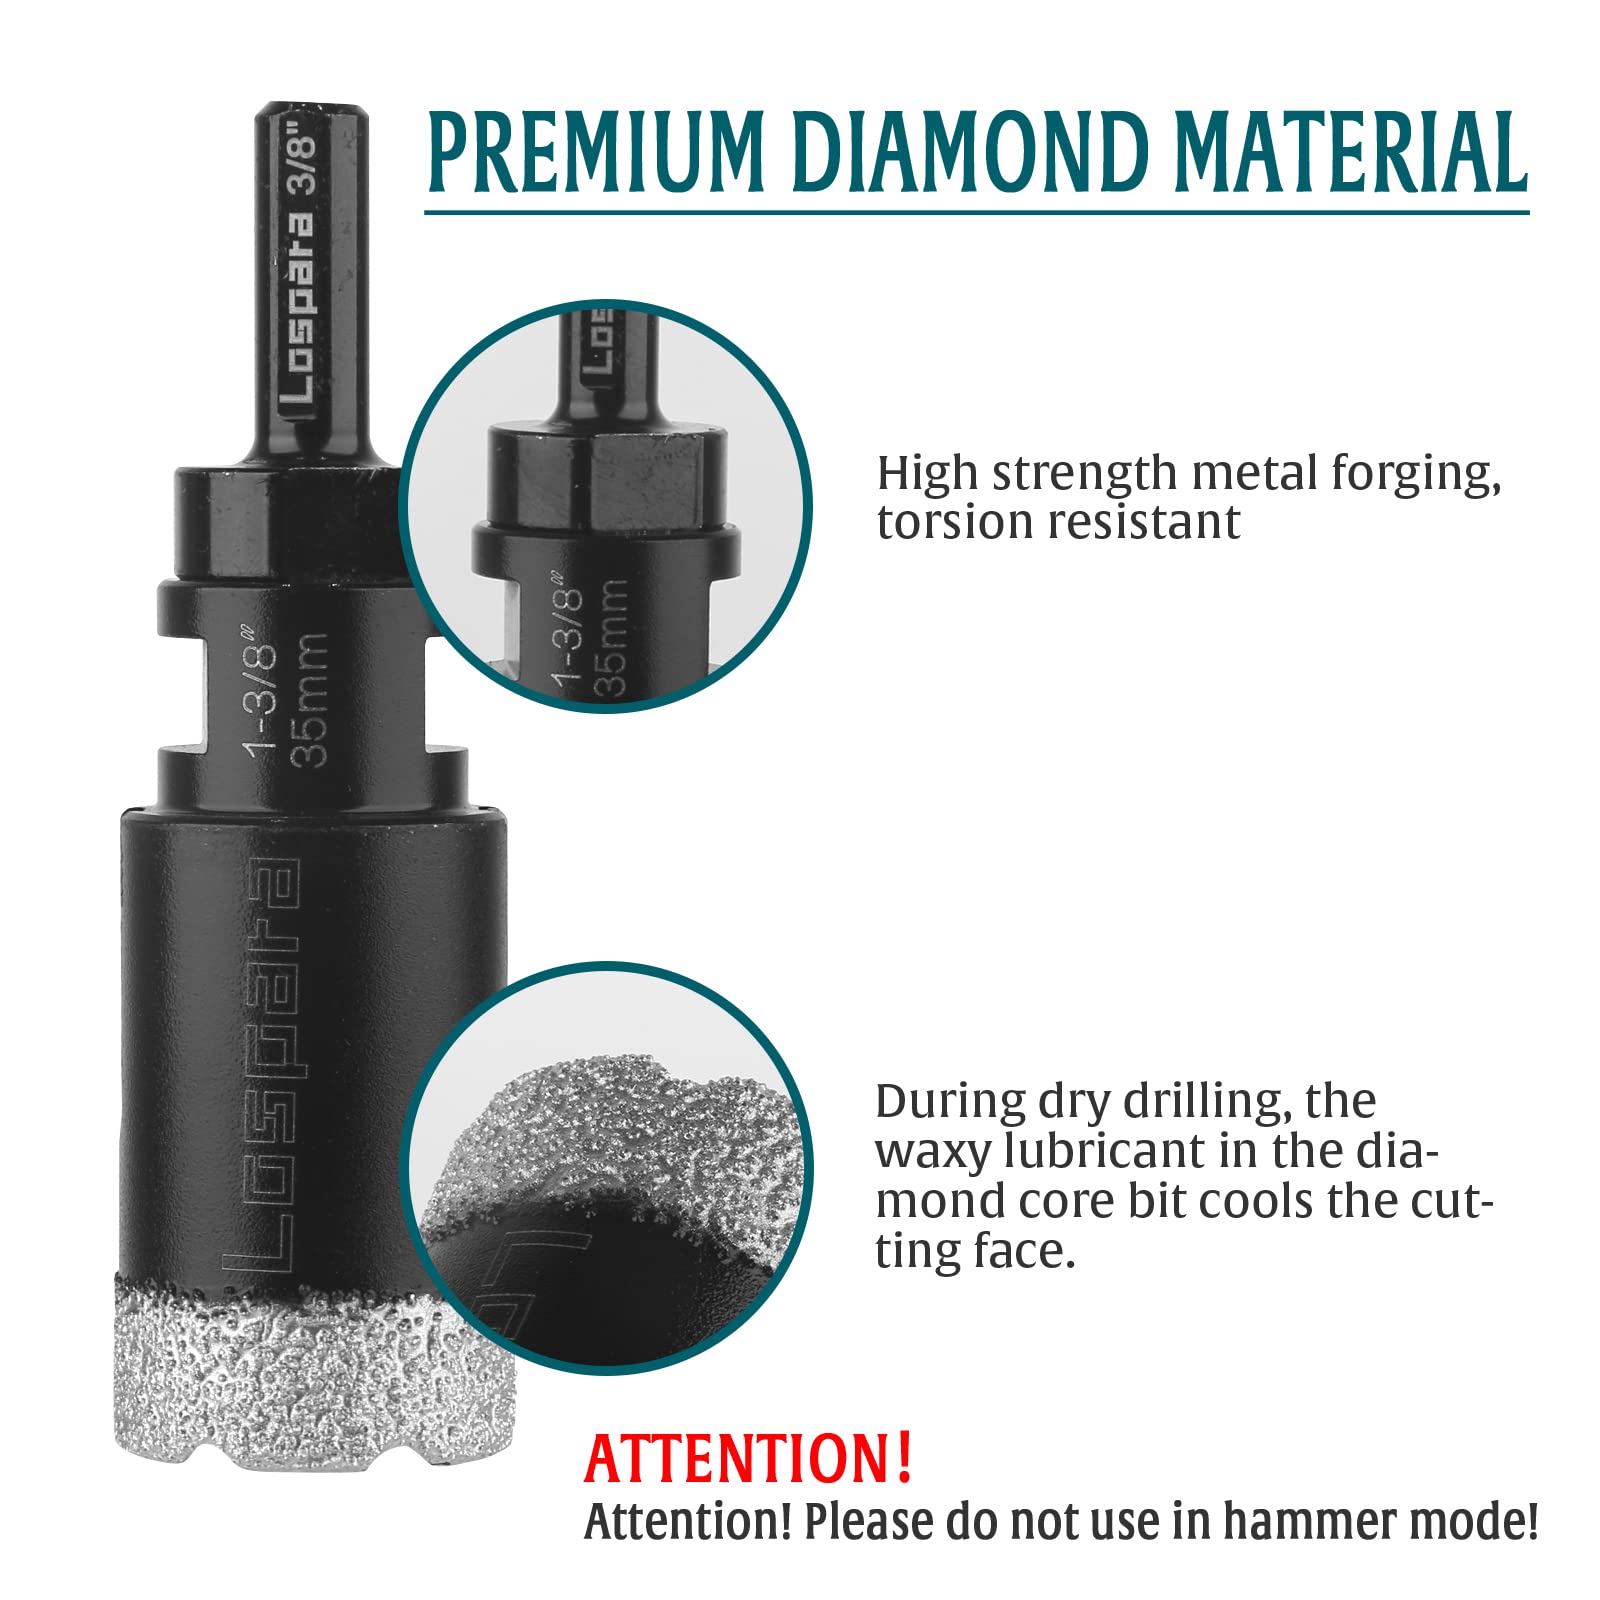 Dry Diamond Core Drill Bit, 1-3/8" 35mm Vacuum Brazed Hole Saw for Marble Porcelain Brick Masonry Concrete Hard Materials, Diamond Tile Hole Saws with 5/8-11 Thread Plus 3/8 Hex Shank Adapter